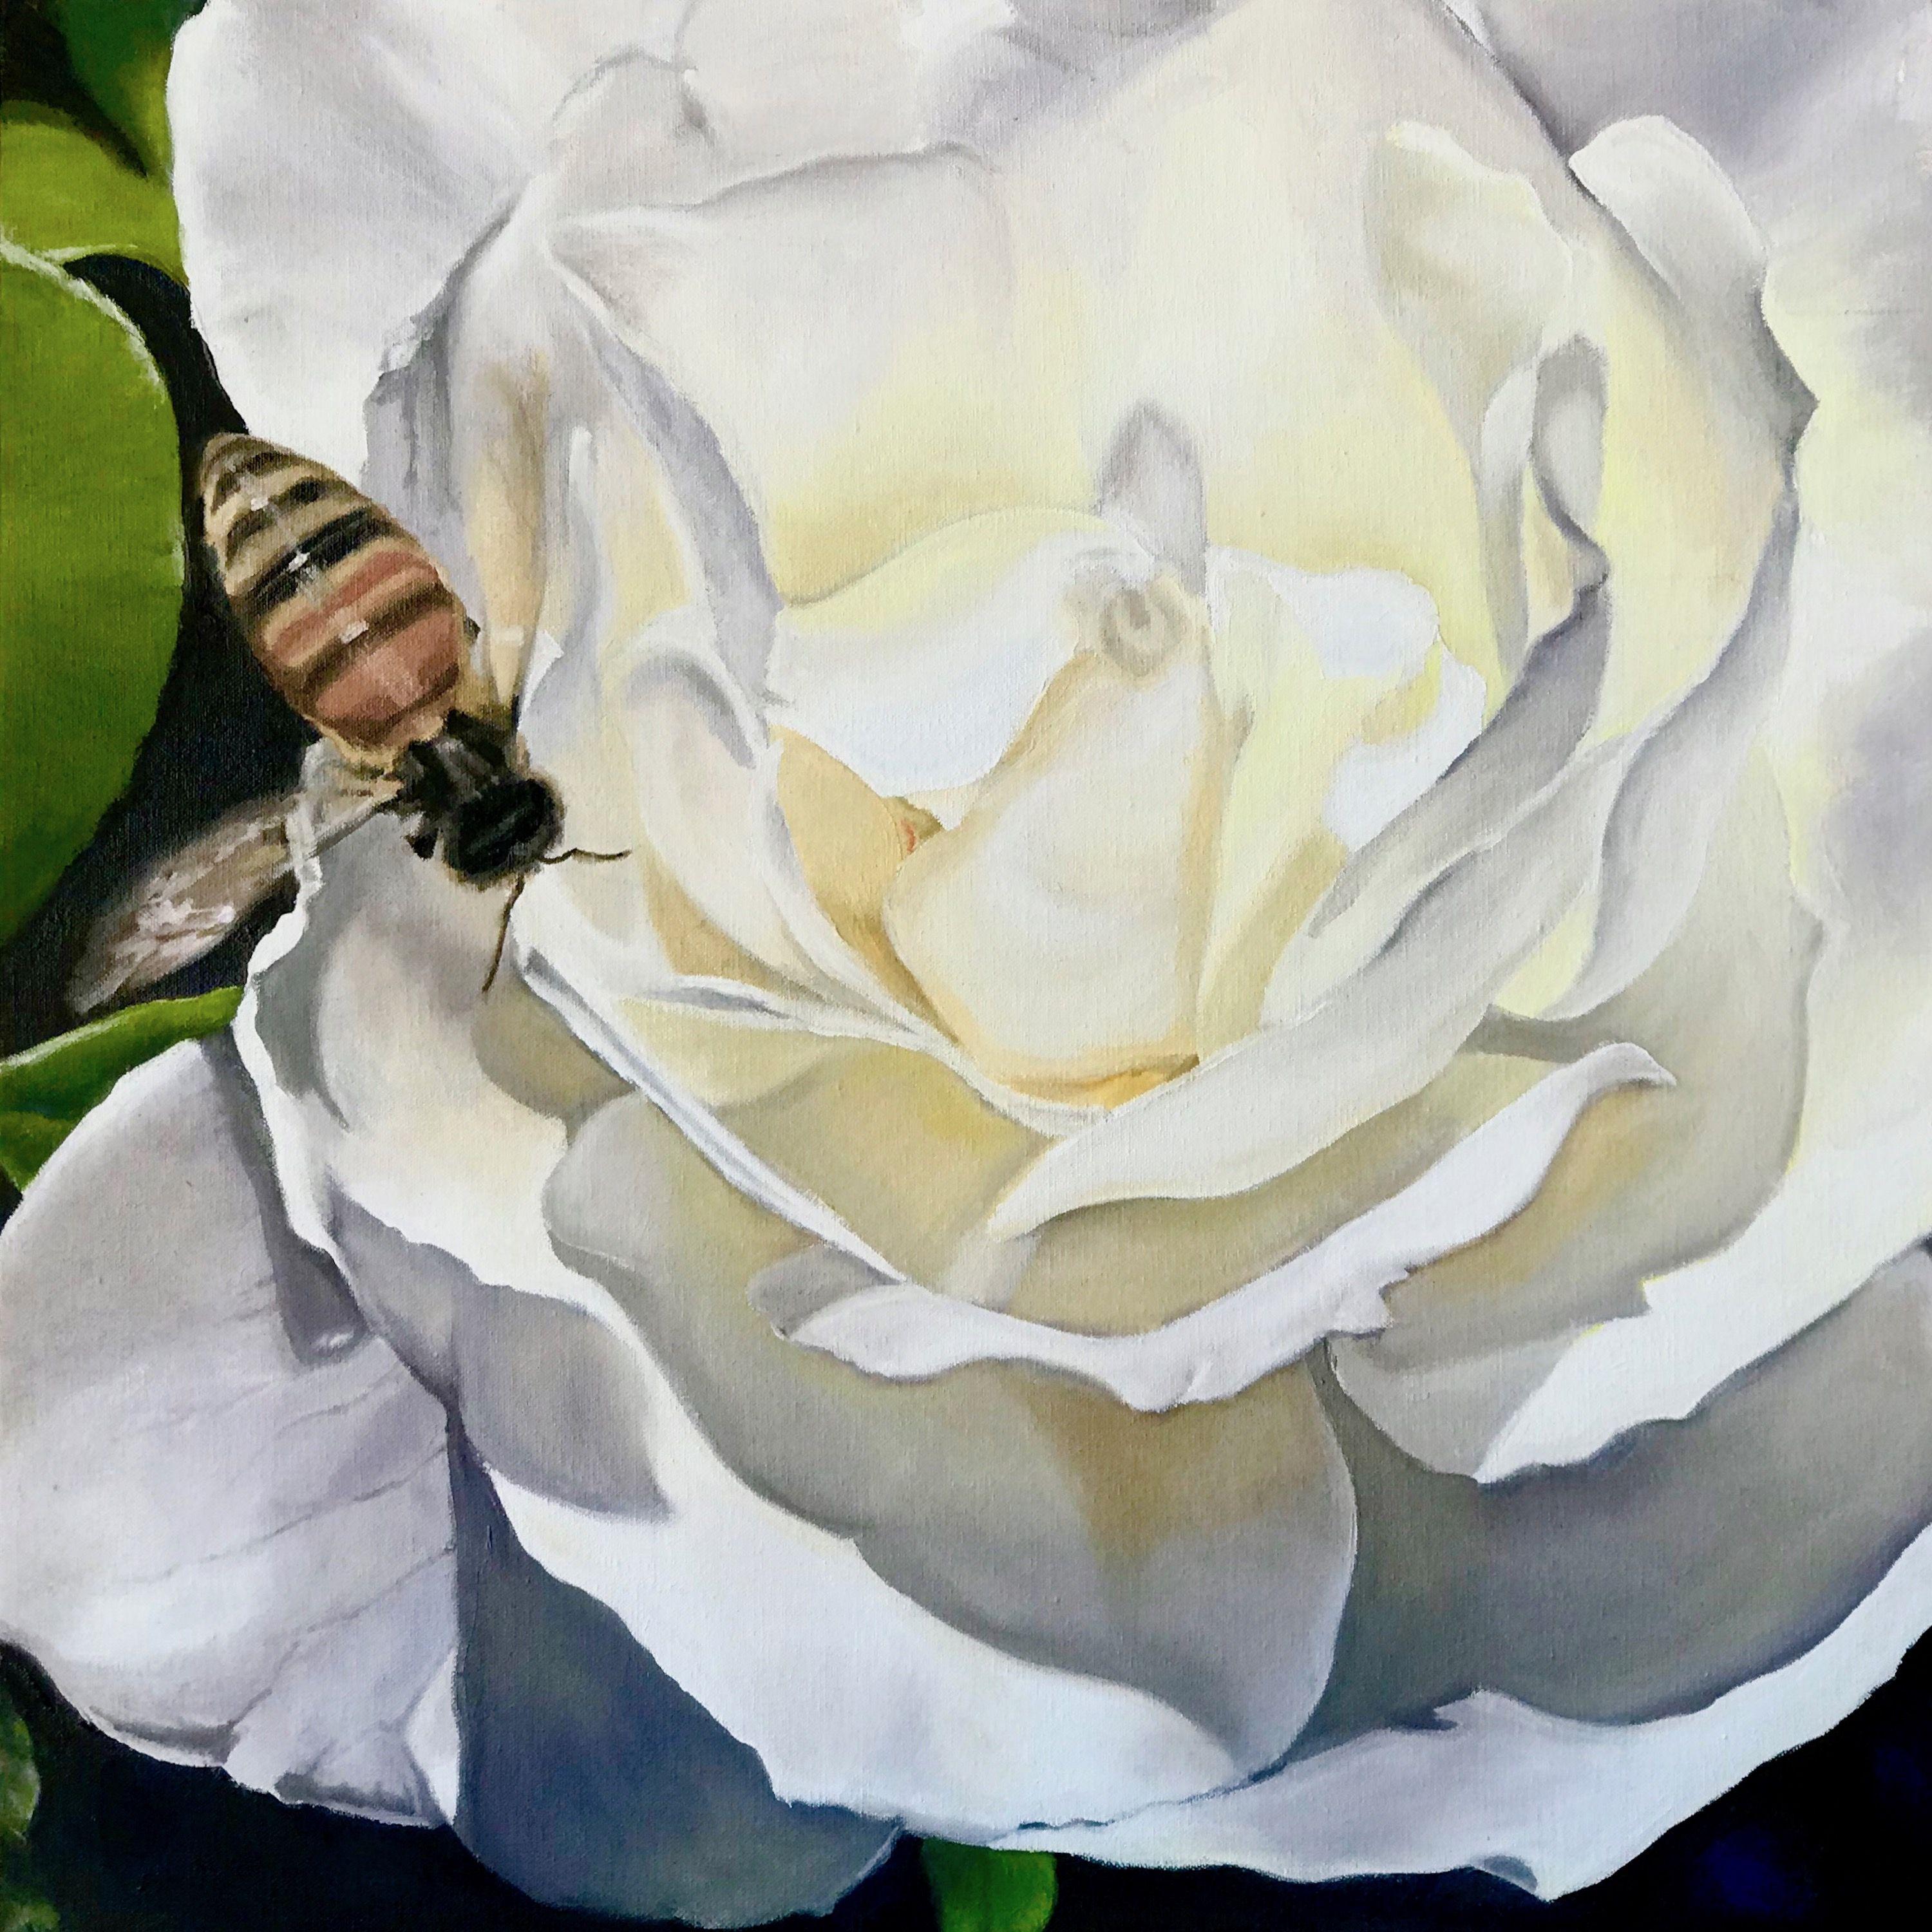 This white tea rose (John F. Kennedy) offers itself up to be pollinated and to feed a ready and willing honey bee. This primordial exchange of favor for favor is a small miracle of every summer day. They do a dance of survival and mutual